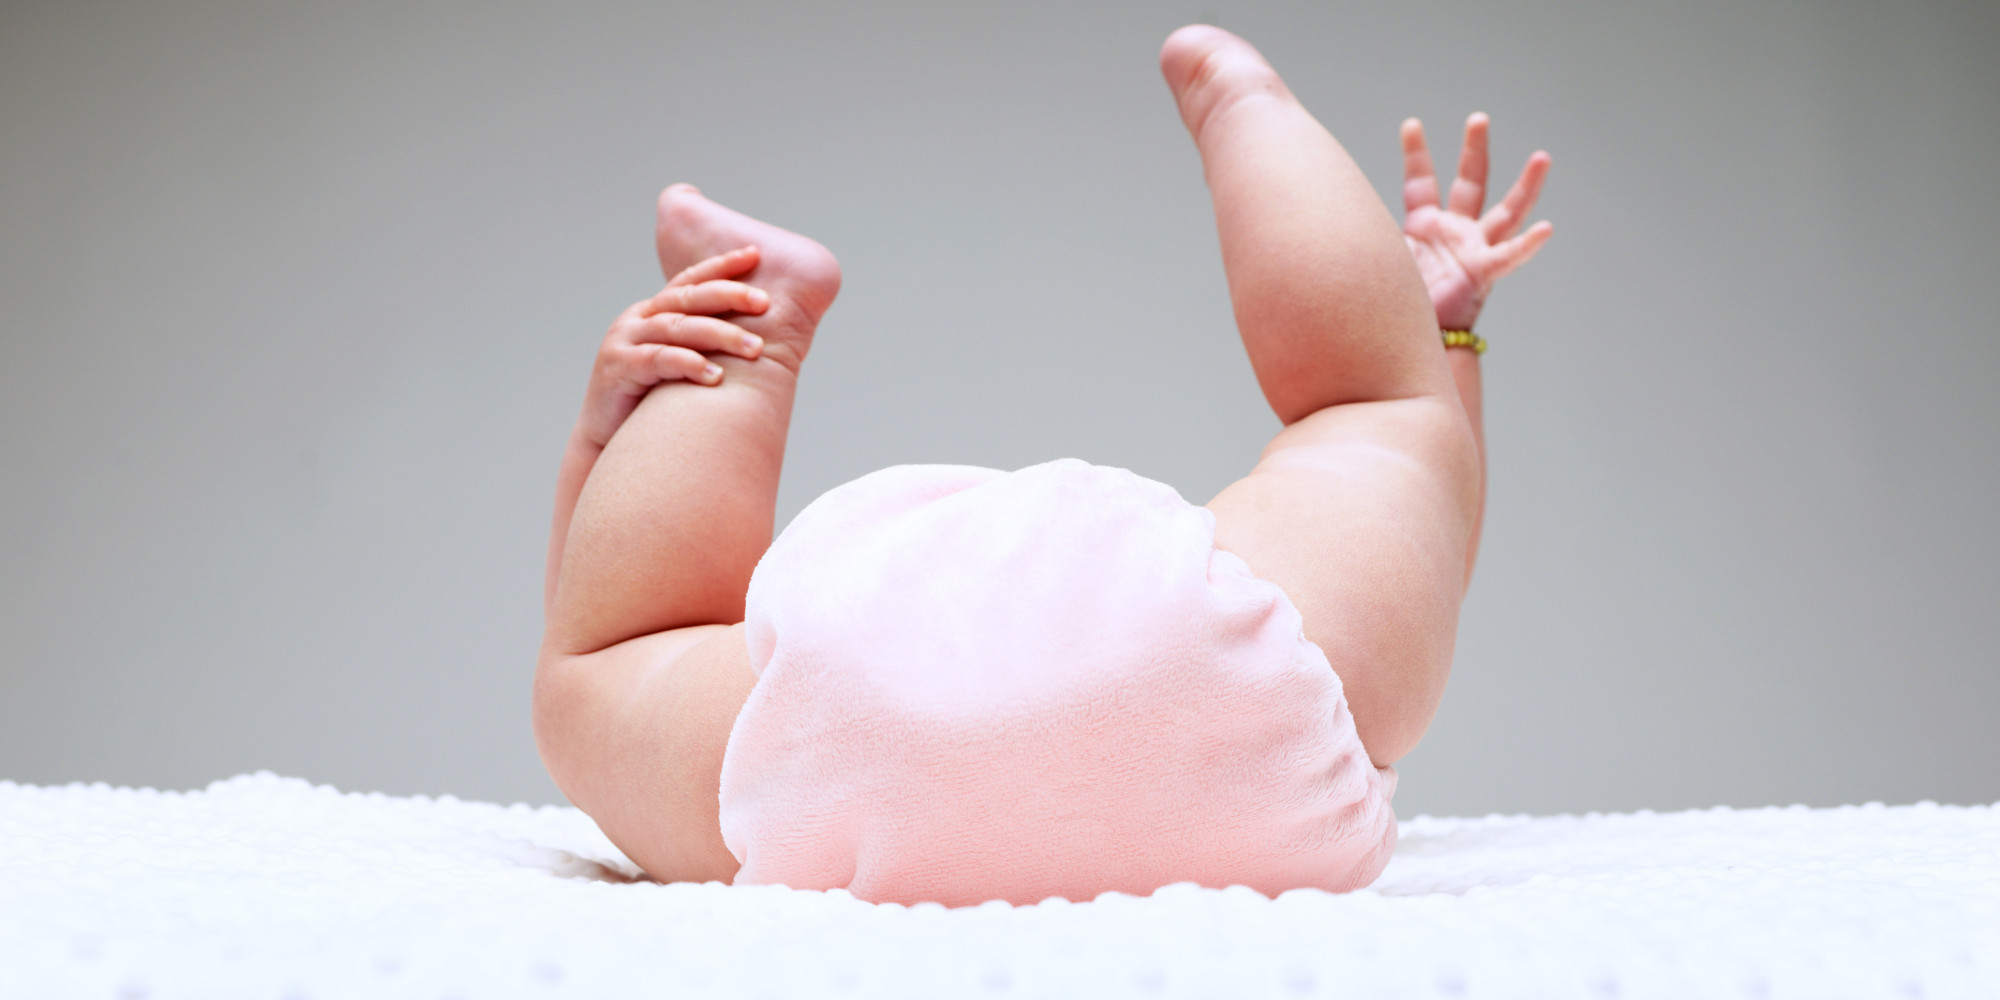 How To Treat A Baby For Diaper Rash: 8 Easy Steps